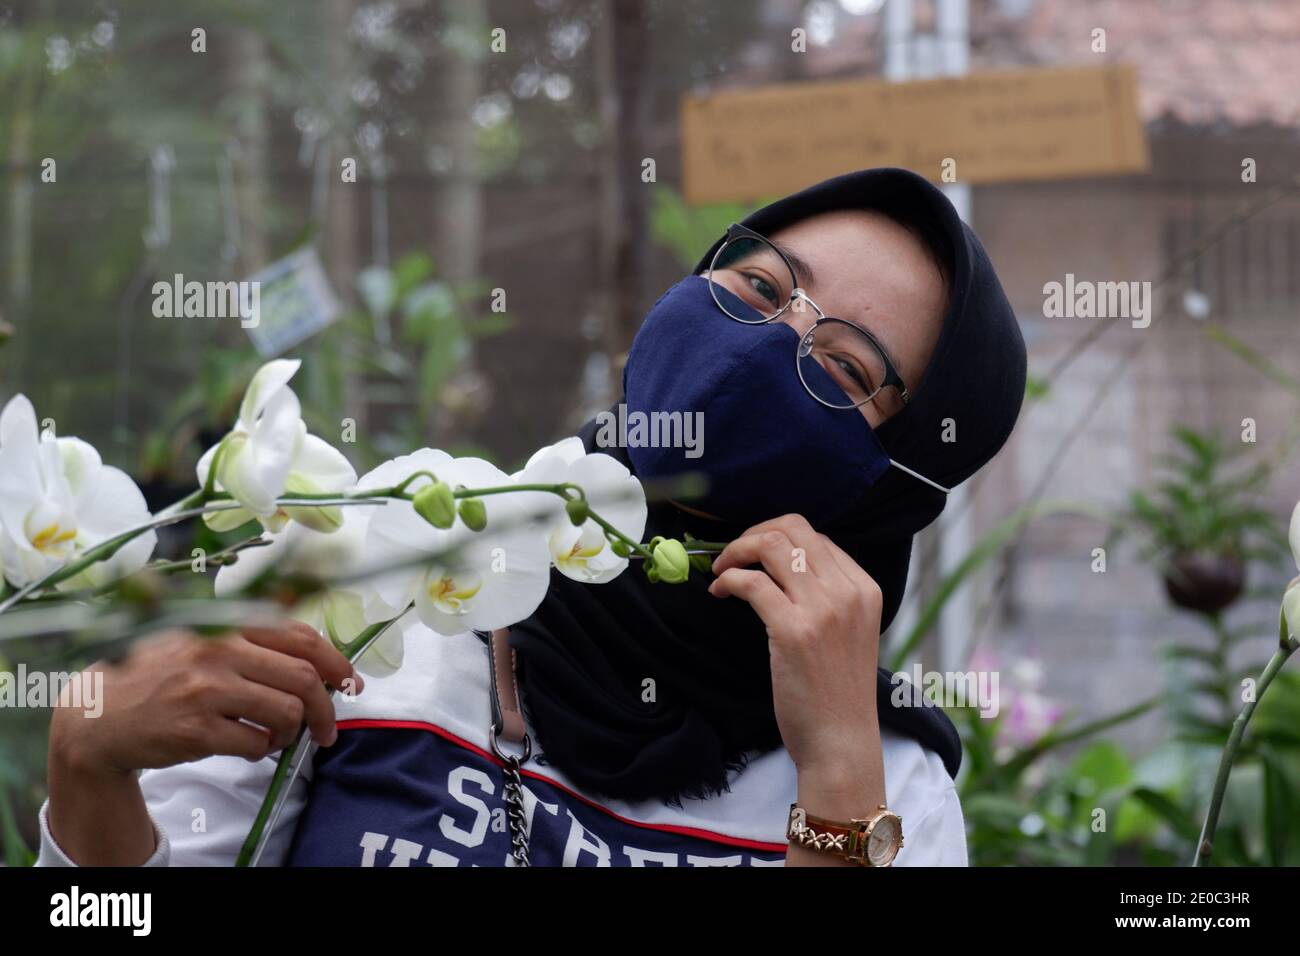 Beautiful female tourists who wear hijab visiting flower gardens during the pandemic wear masks to comply with health and safety protocols from COVID Stock Photo